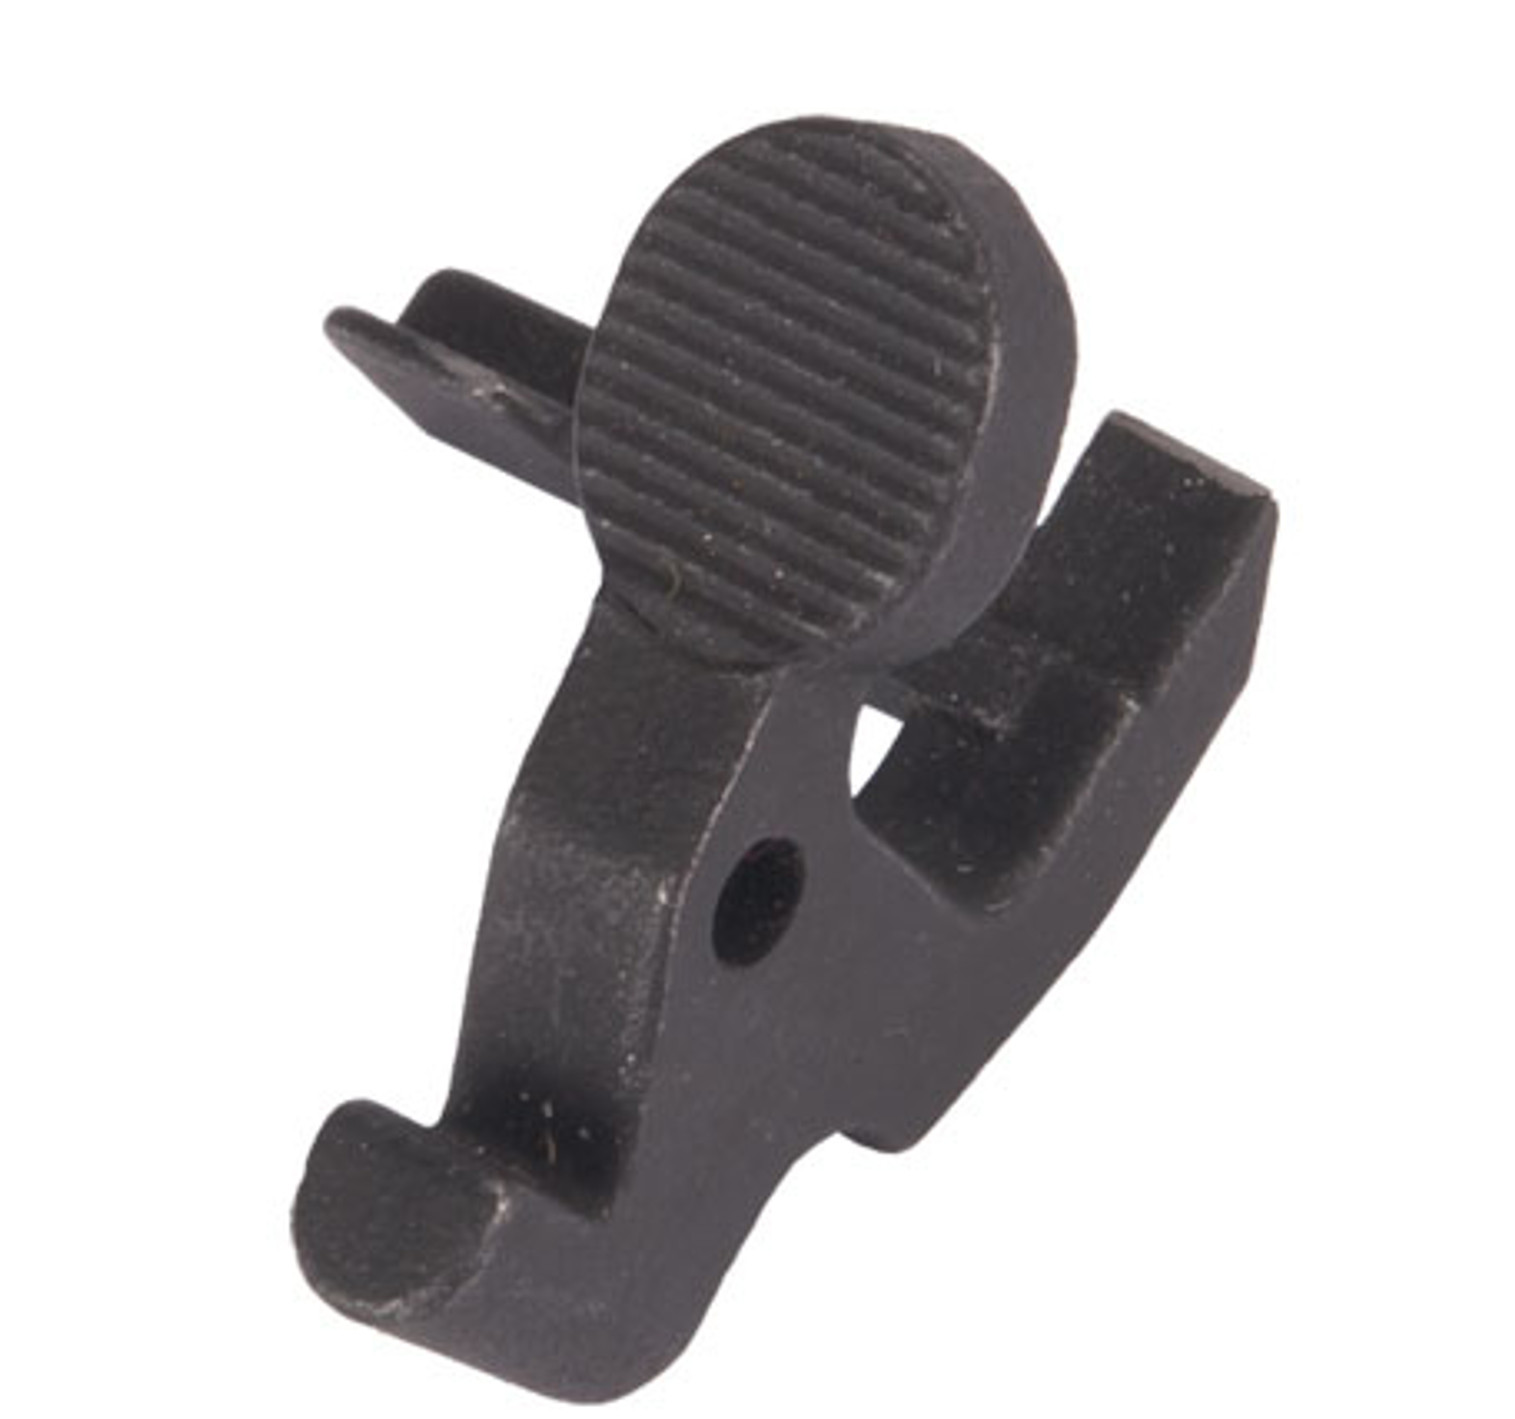 WE PDW Airsoft GBB Rifle Part #127 - Bolt Catch / Release